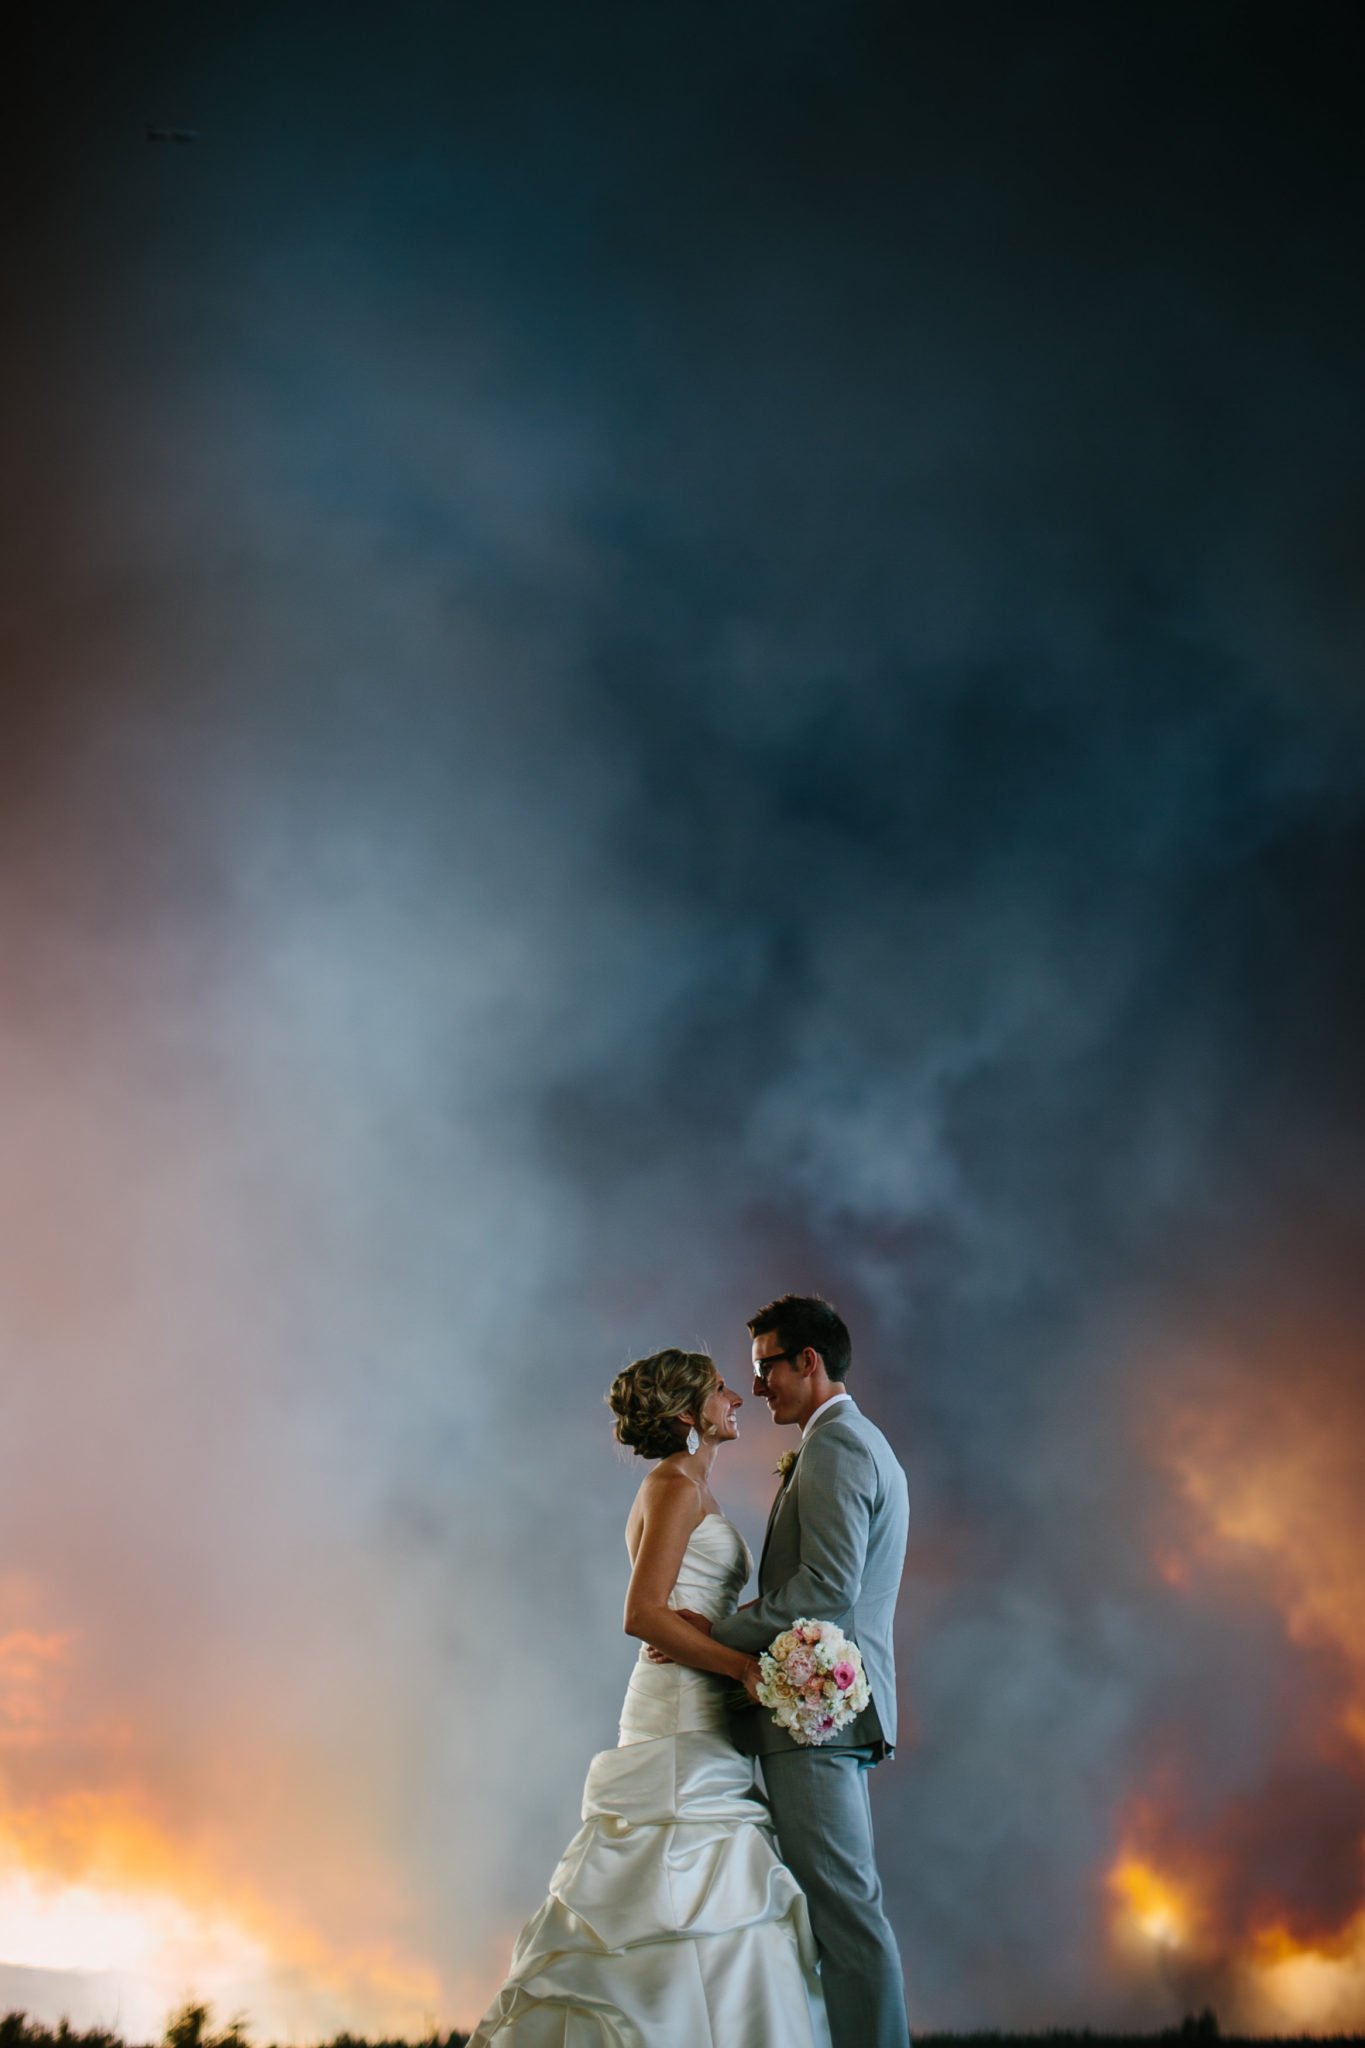 The Couple Who Used a Wildfire in Their Wedding Photos (and Much More)